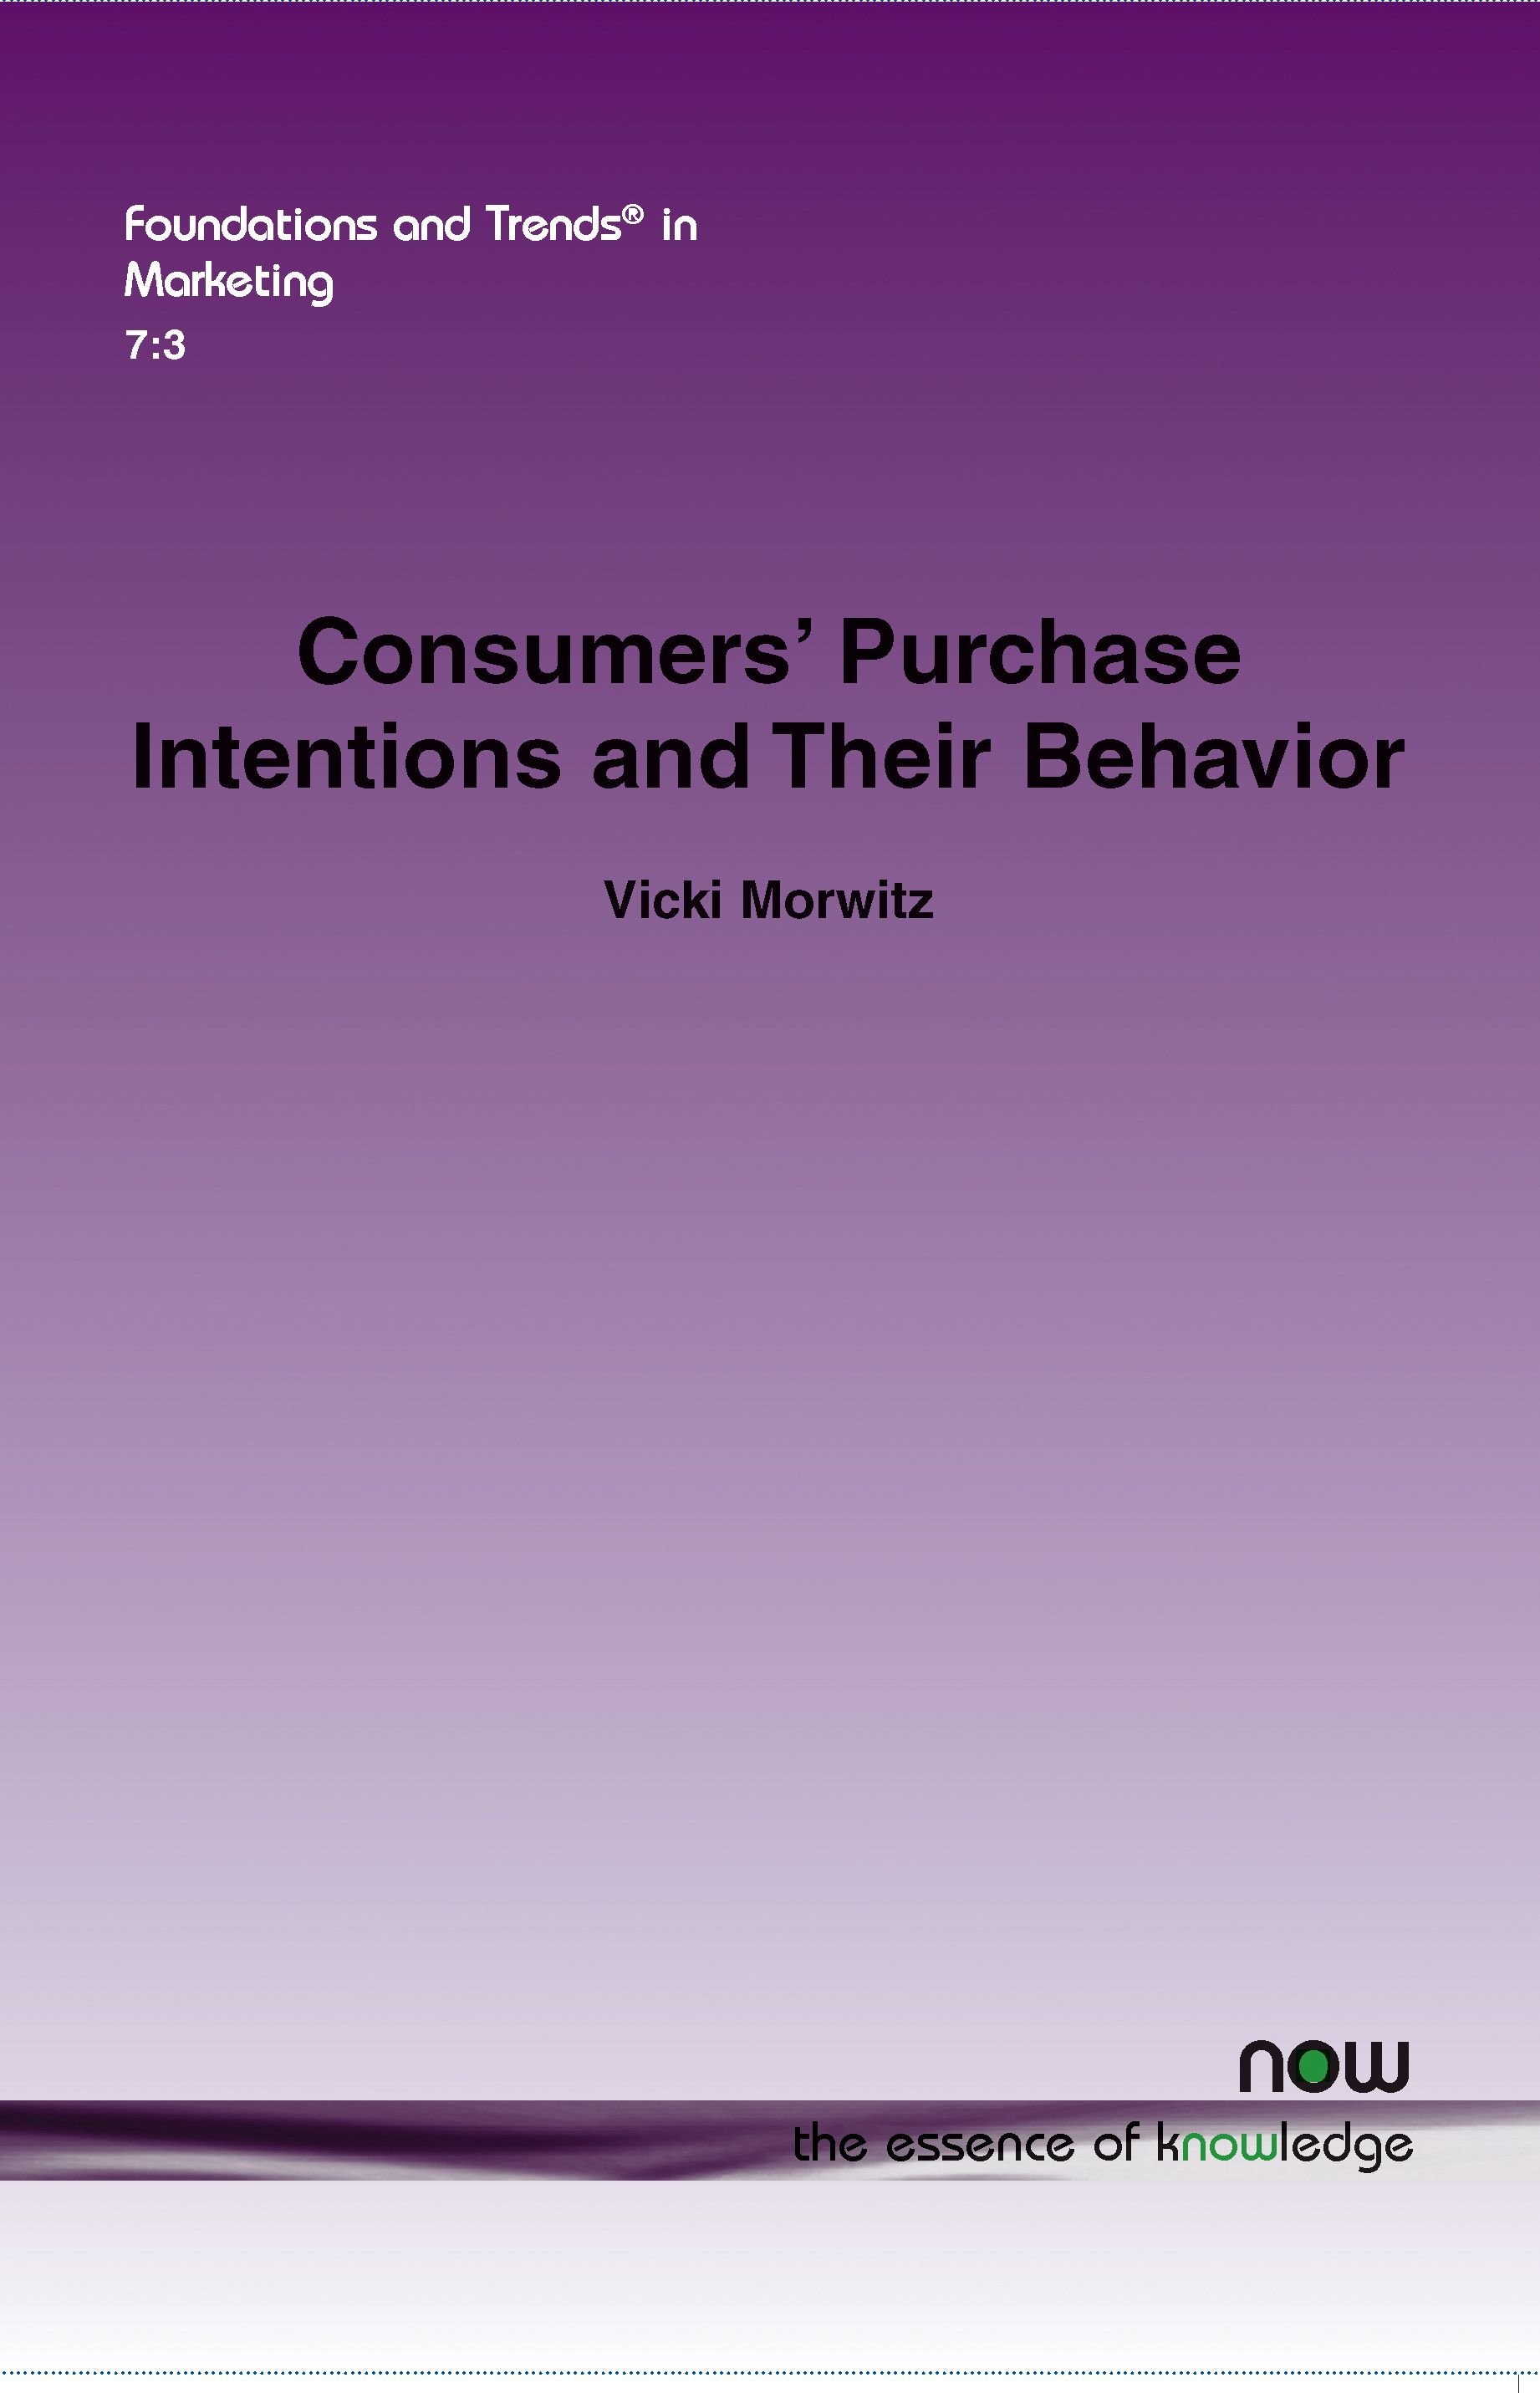 Consumers' Purchase Intentions and Their Behavior